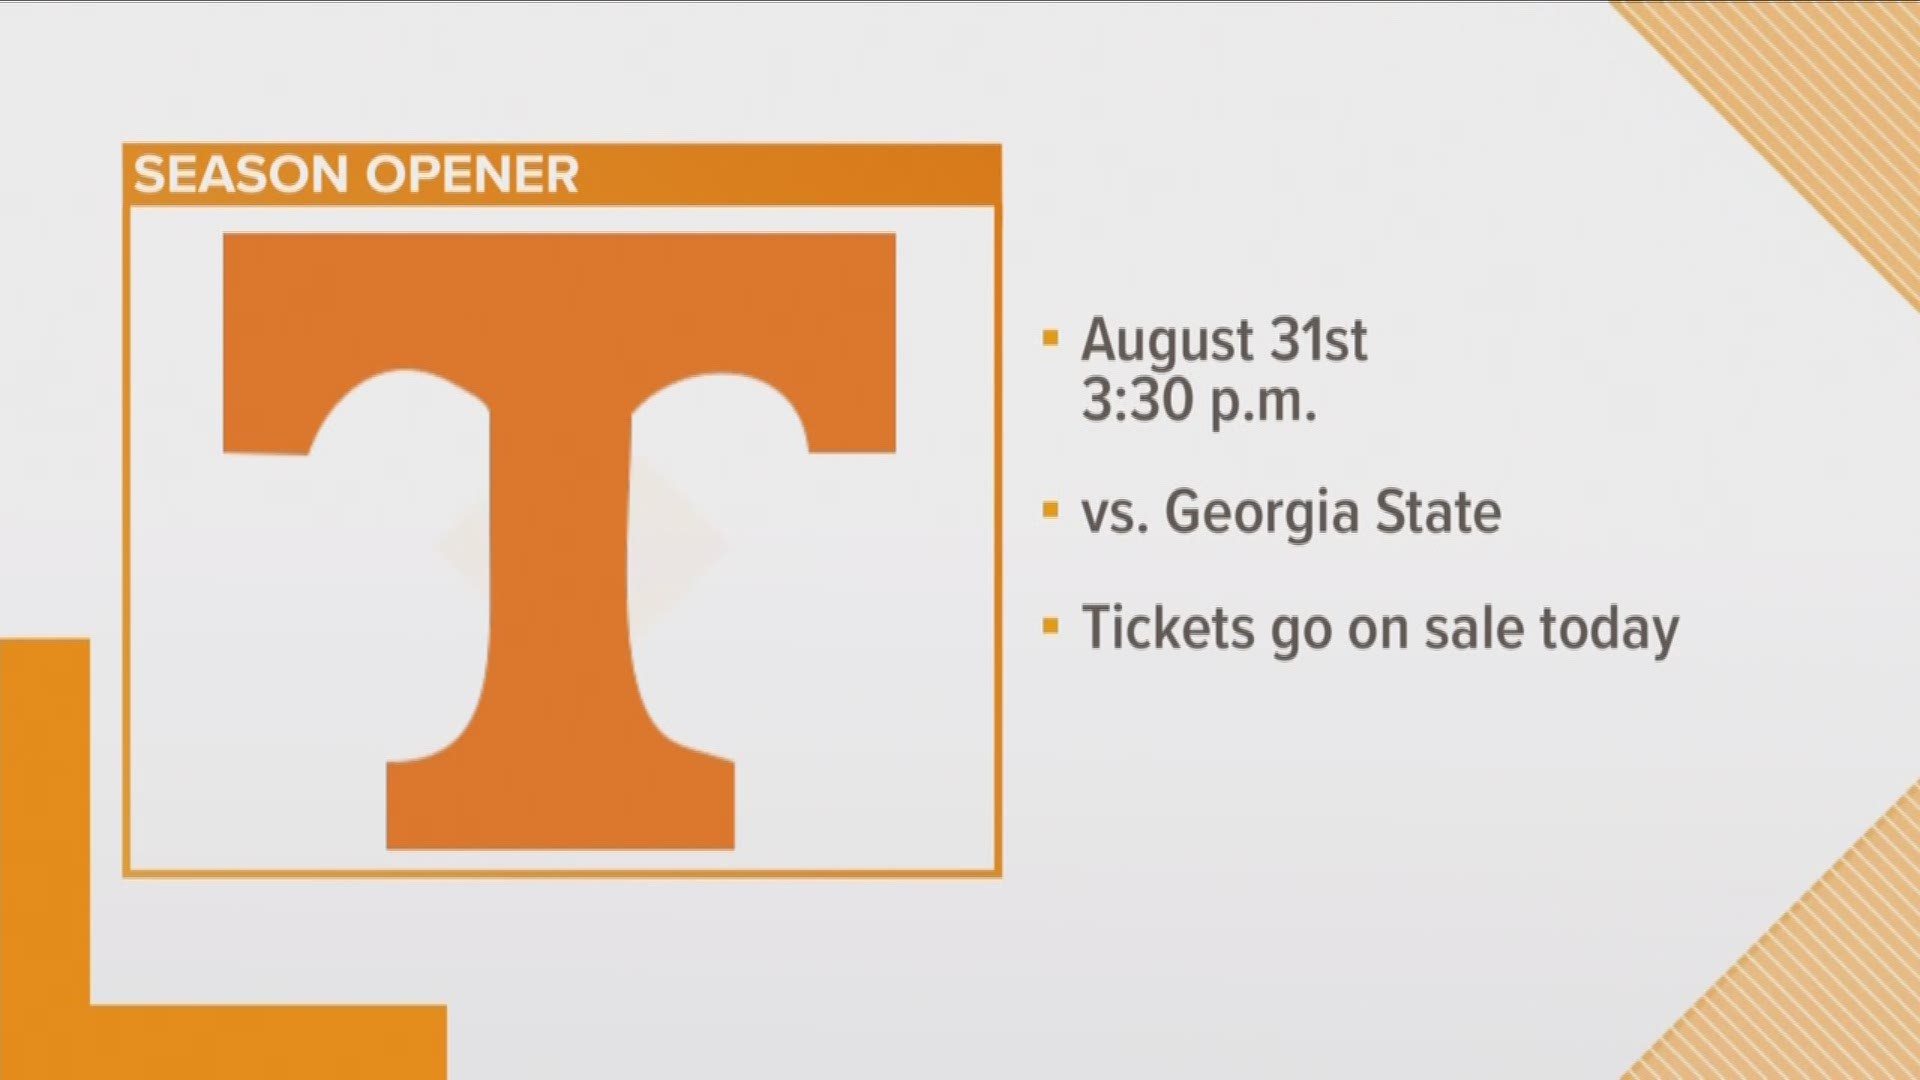 If you're ready for the football season single game tickets go on sale today! You can buy them at allvols.com.